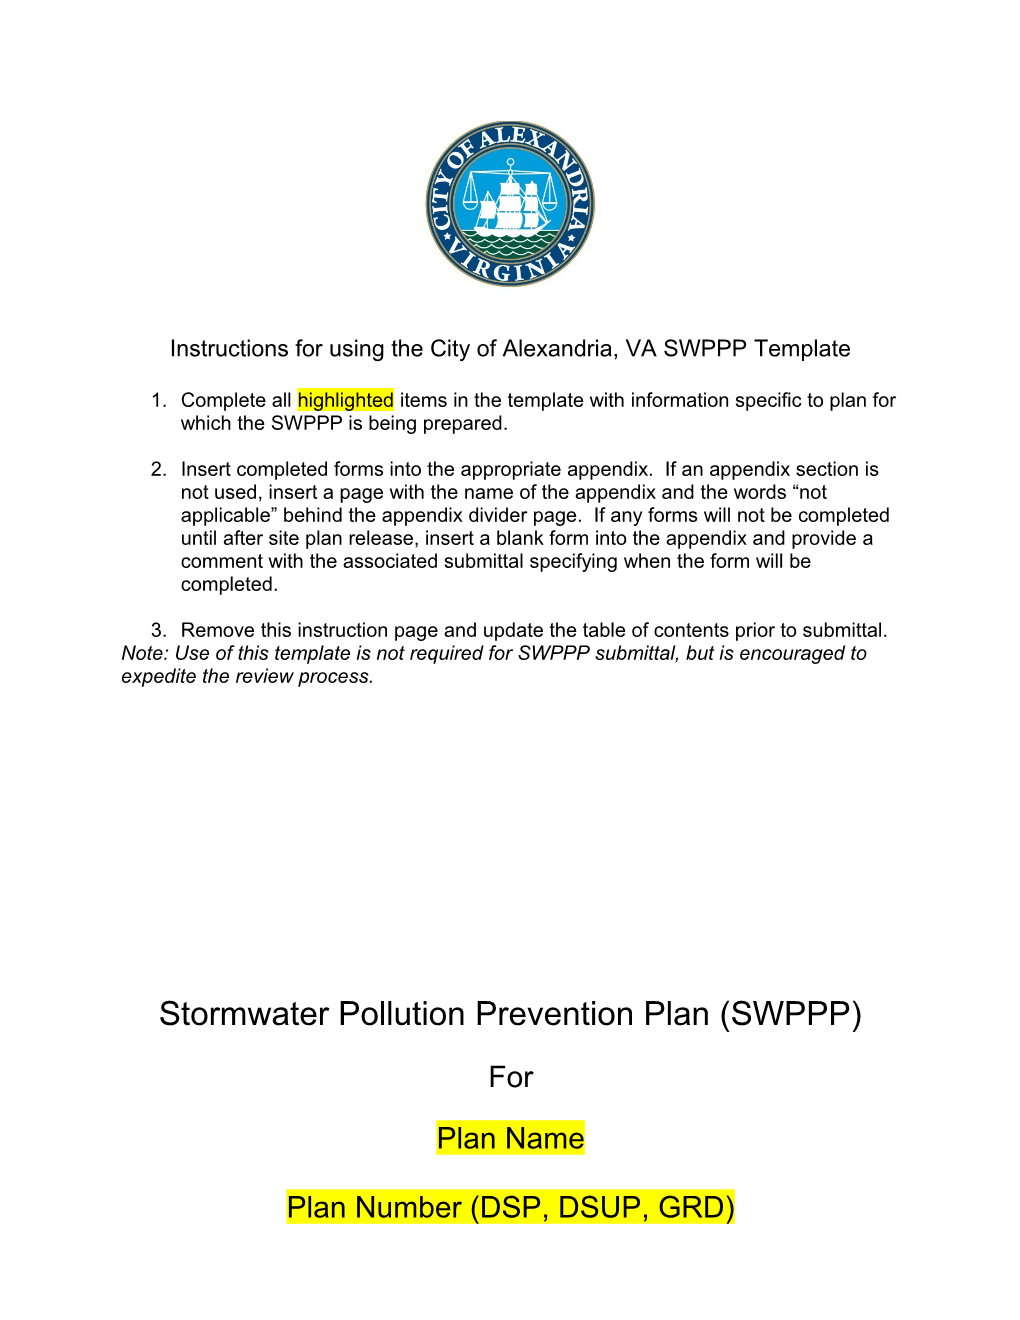 Instructions for Using the City of Alexandria, VA SWPPP Template